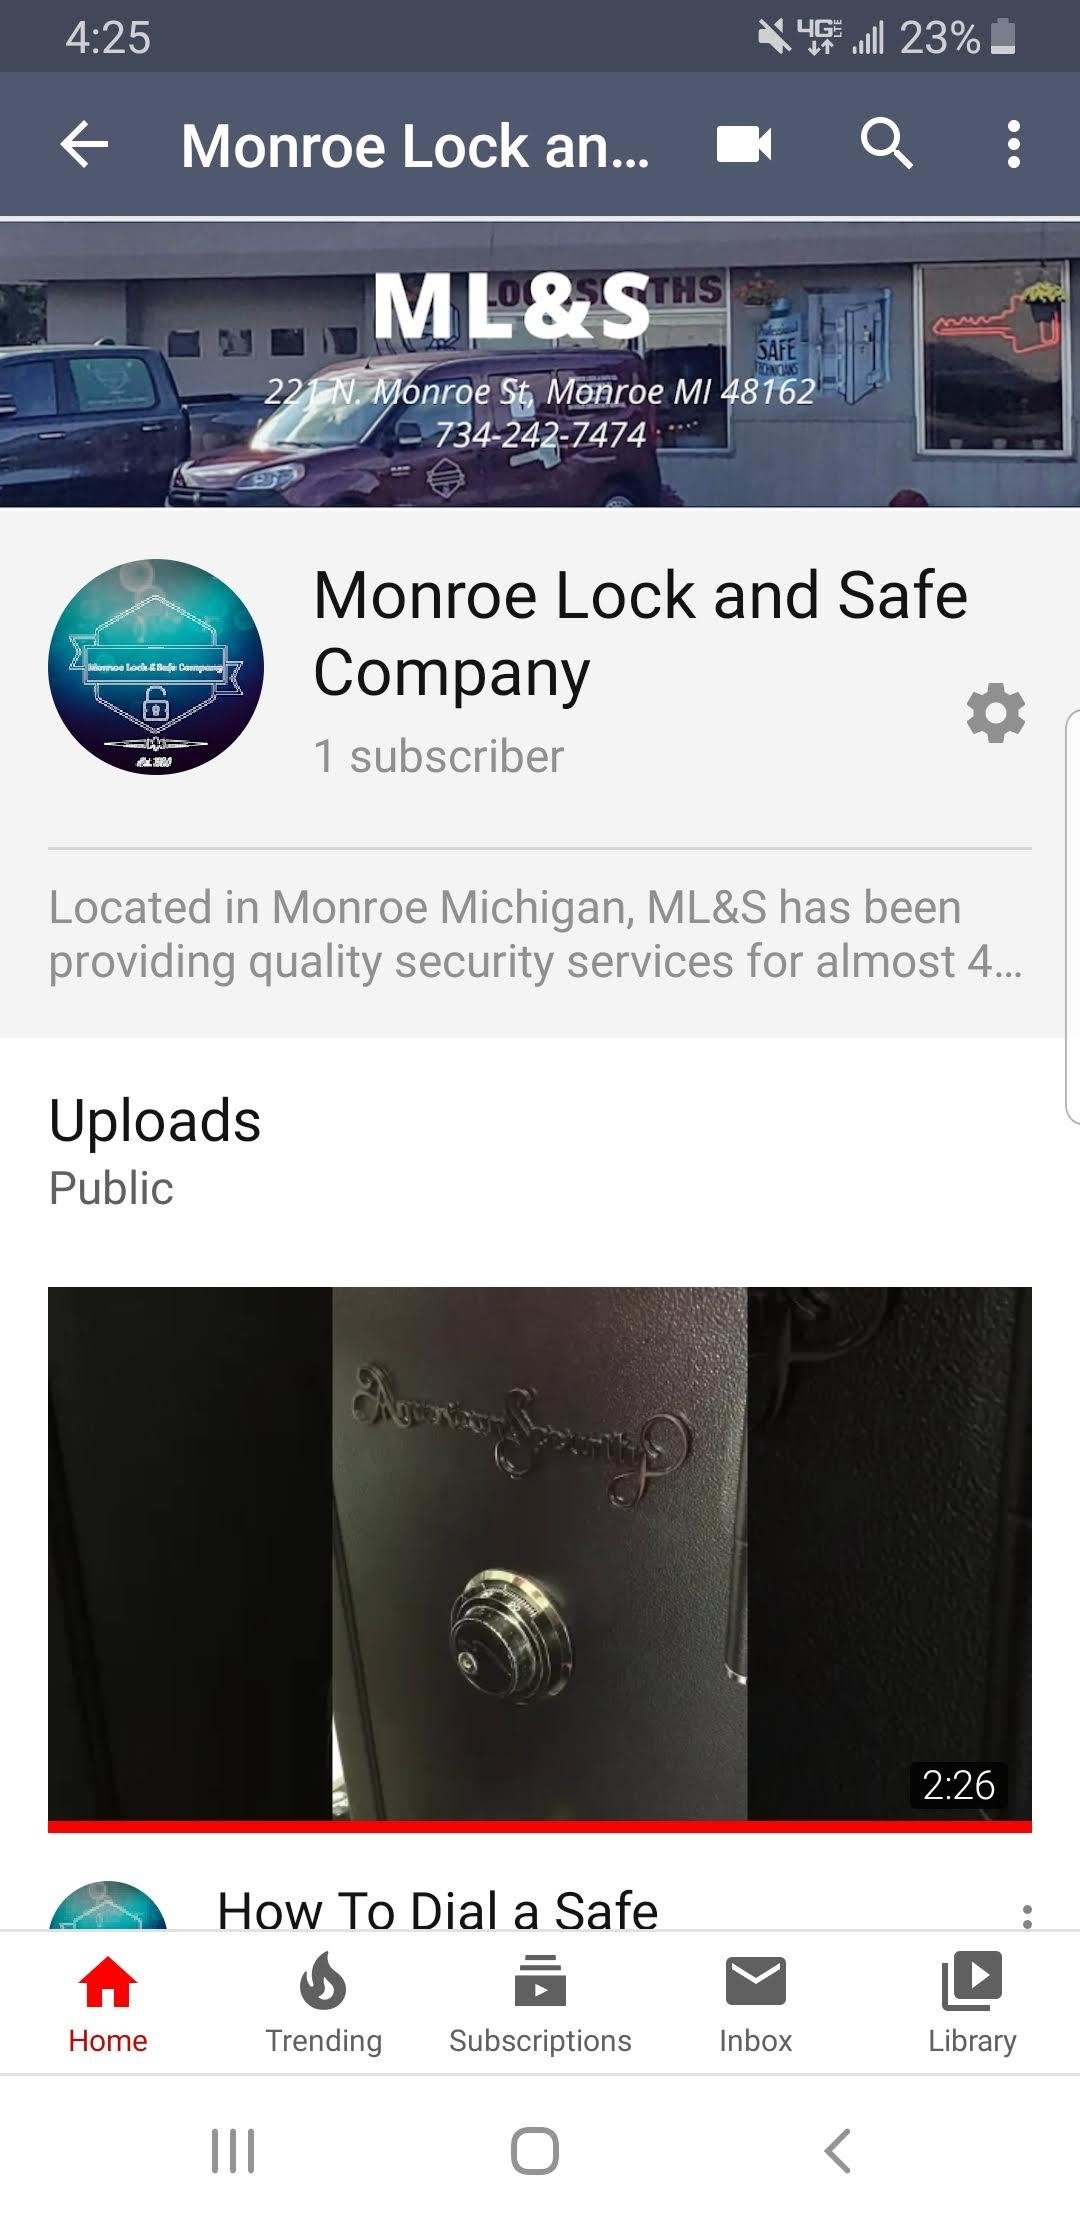 Check Out Our YouTube Channel!